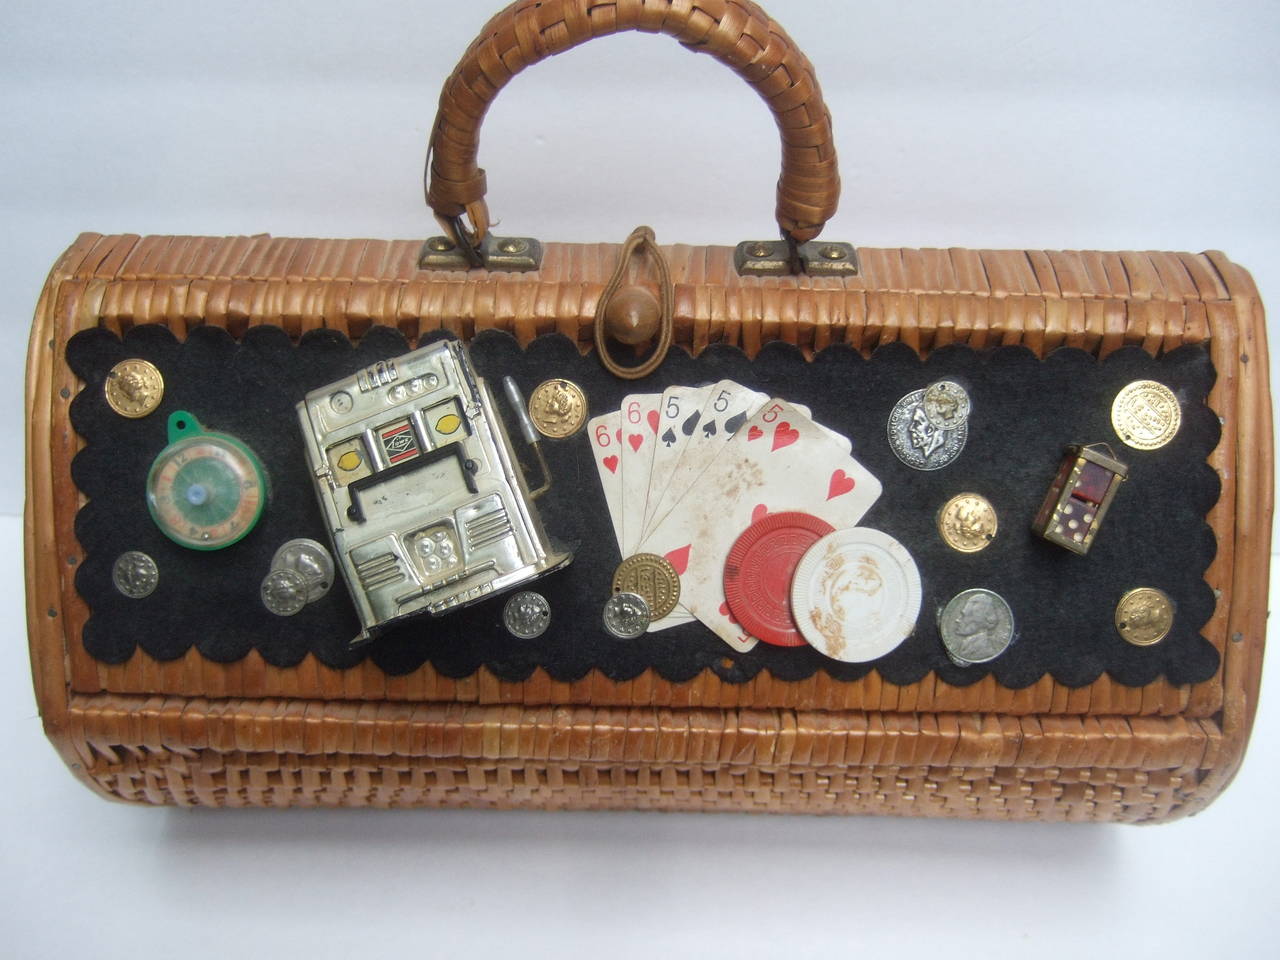 Whimsical wicker casino theme large retro handbag c 1960
The quirky vintage handbag is embellished with gambling  
theme embellishments on the front & sides

The front exterior black felt panel is decorated with playing
cards, coins, dice,